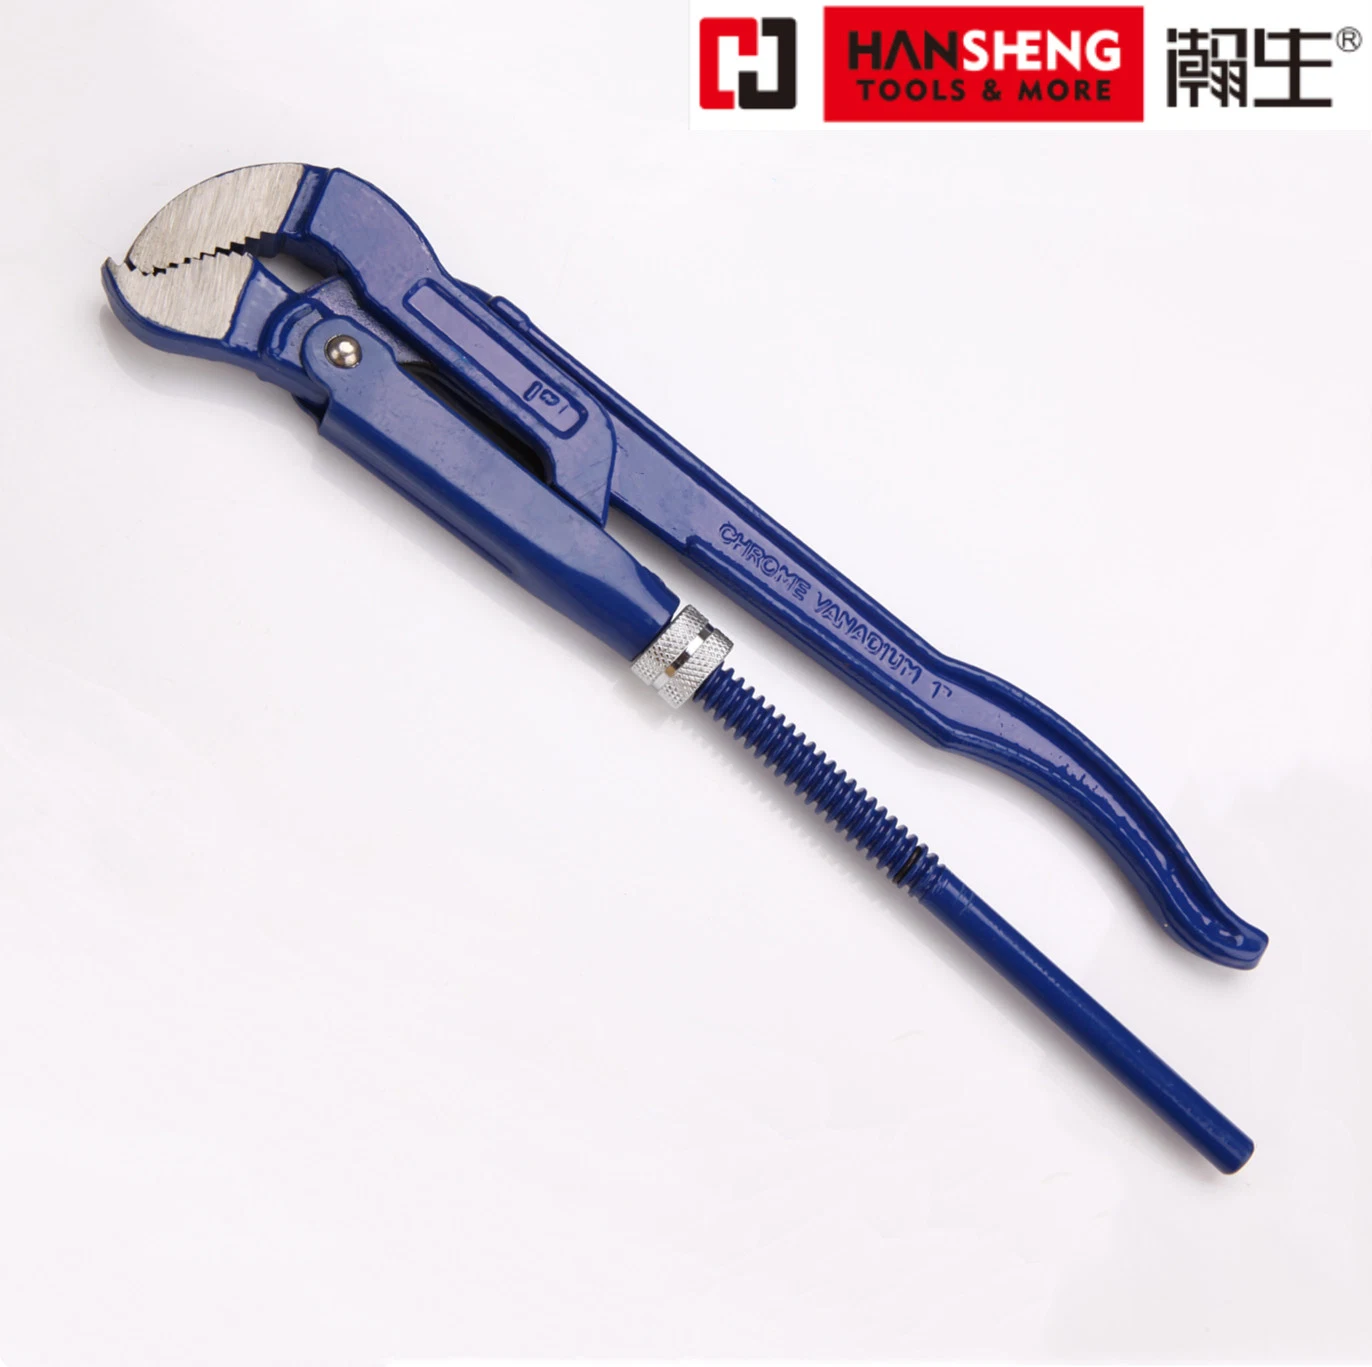 Made of Carbon Steel, CRV, Polish, Black, Chrome, Nicke or Pearl Nickel Plated, PVC or Dipped Handle, Pliers, Water Pump Pliers, Groove Joint